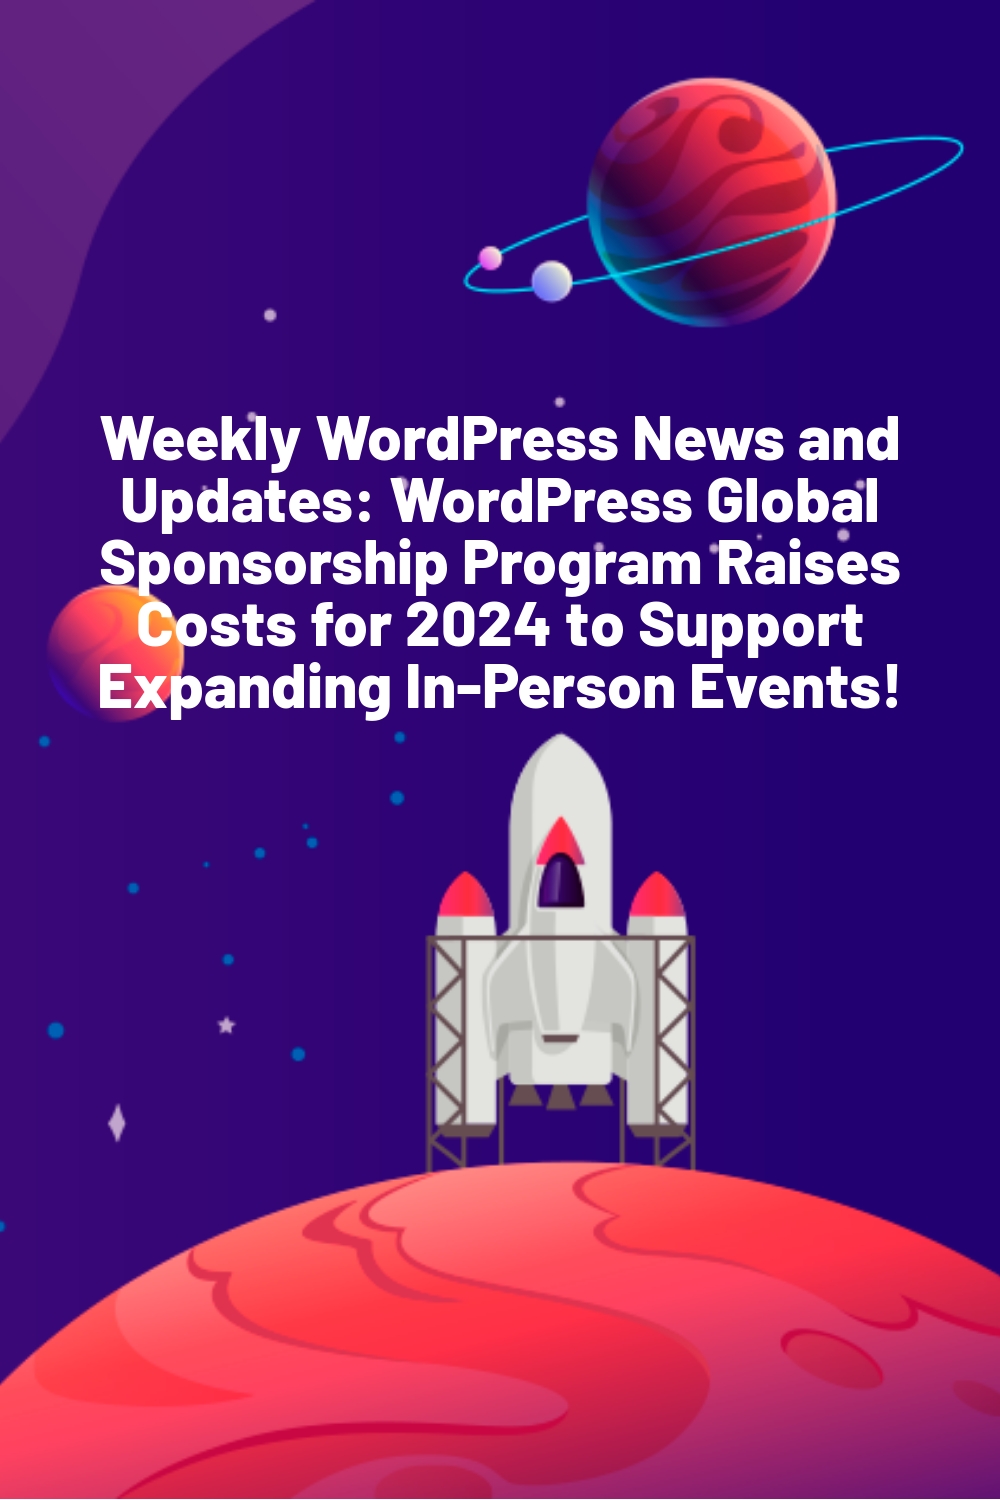 Weekly WordPress News and Updates: WordPress Global Sponsorship Program Raises Costs for 2024 to Support Expanding In-Person Events!